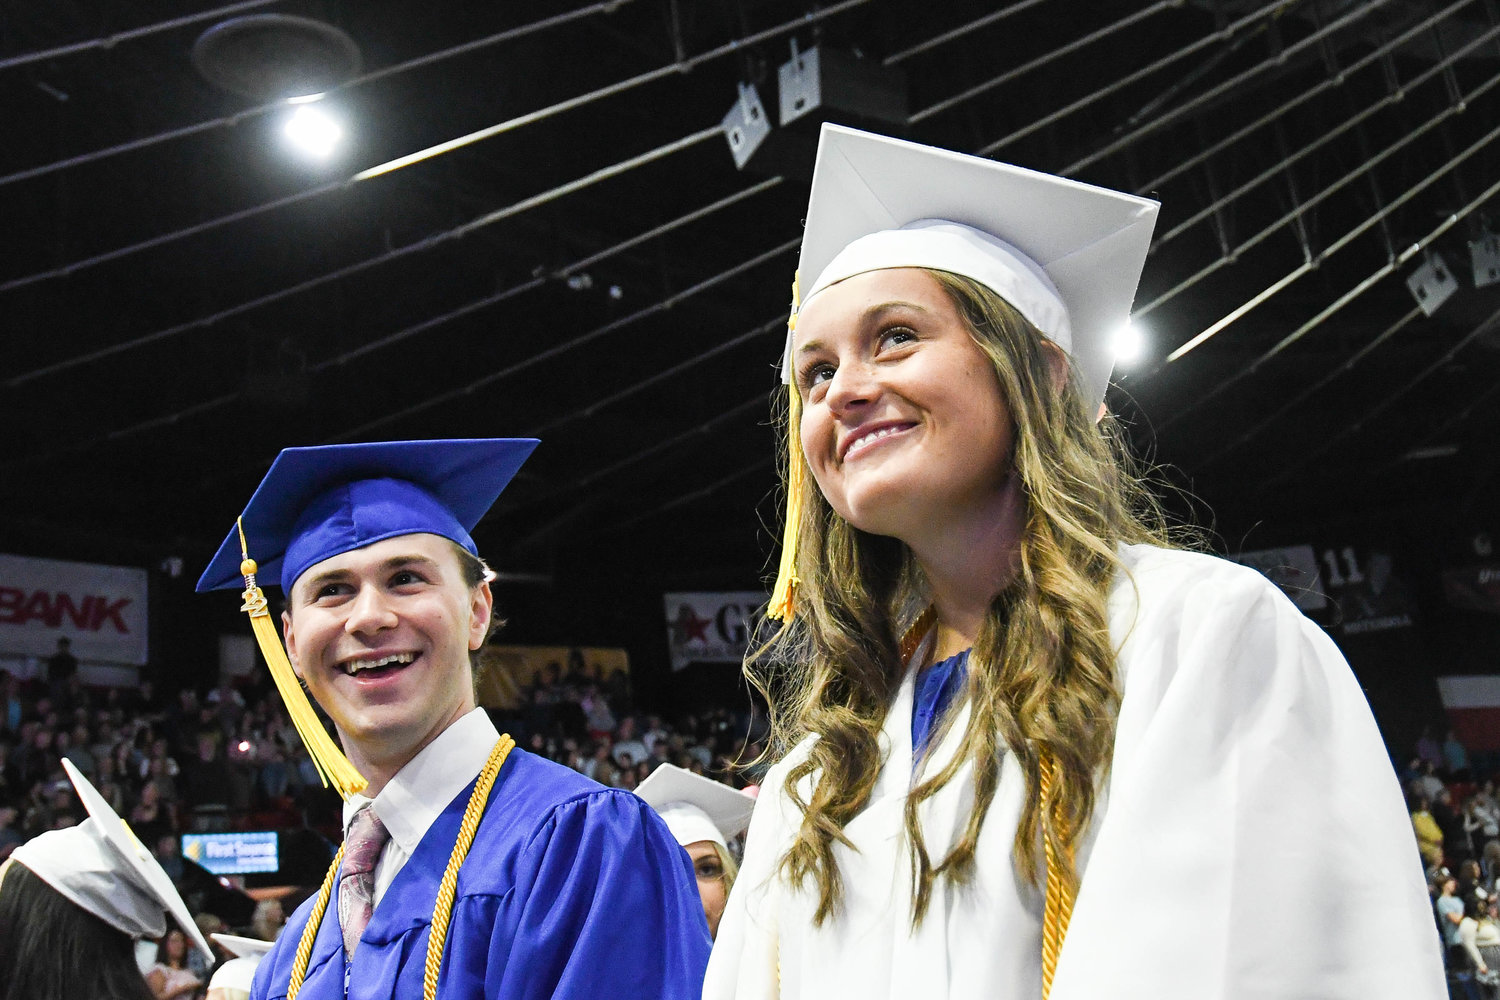 Graduates AJ DiSpirito, left, and Ryann DePerno look around at the crowd during Whitesboro High School’s 87th annual commencement ceremony for the class of 2022 on Saturday at the Adirondack Bank Center.